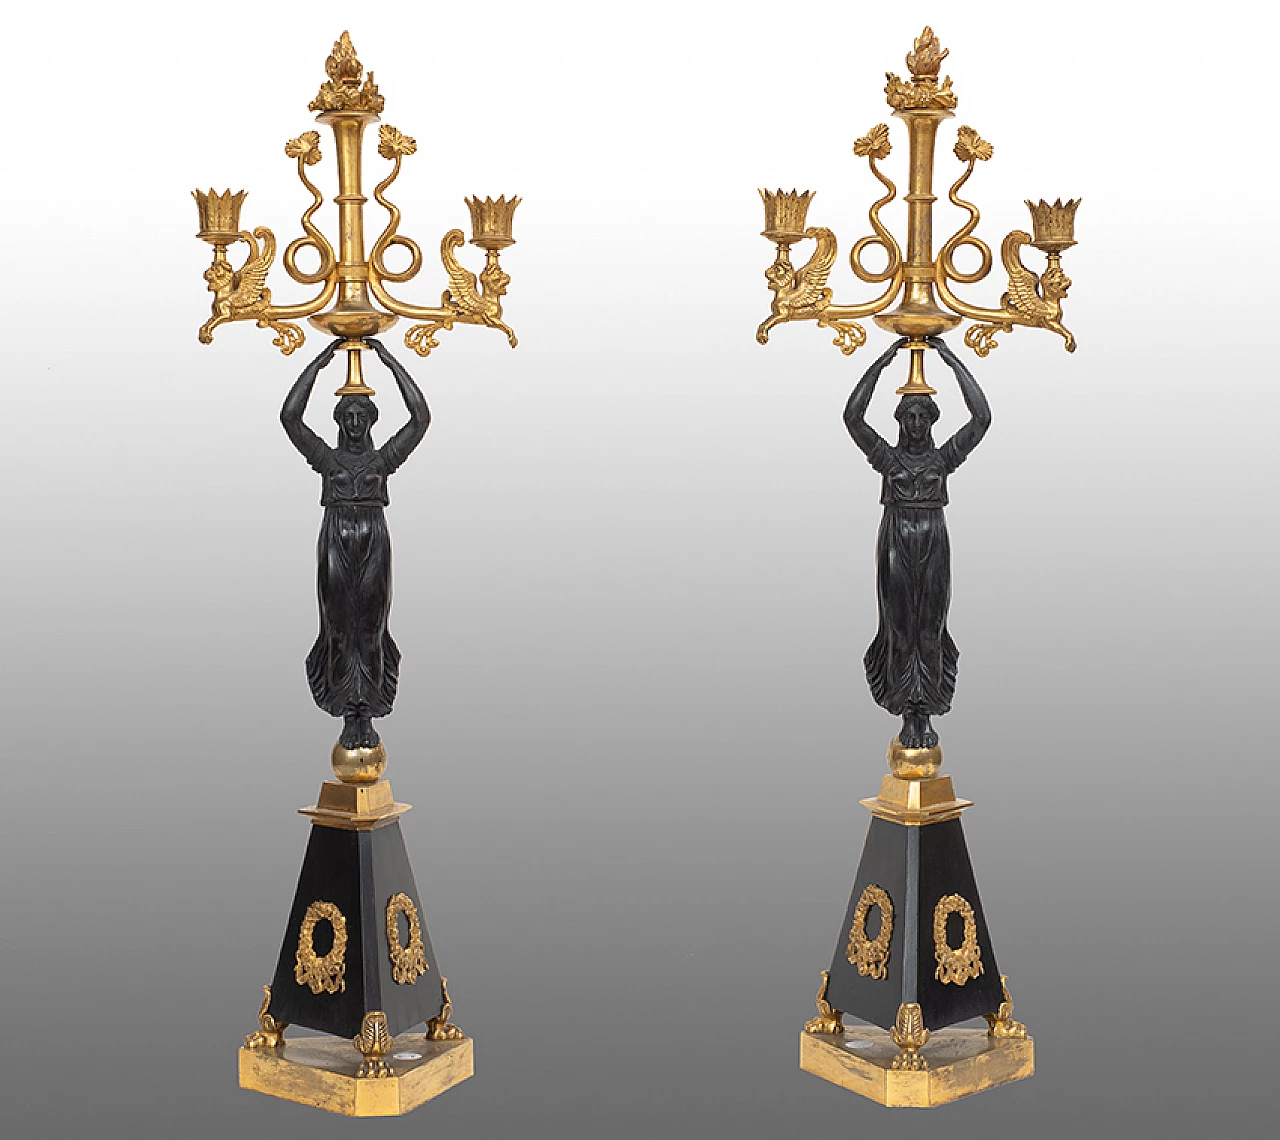 Pair of burnished bronze Direttorio candelabra with figure of a woman, early 19th century 1